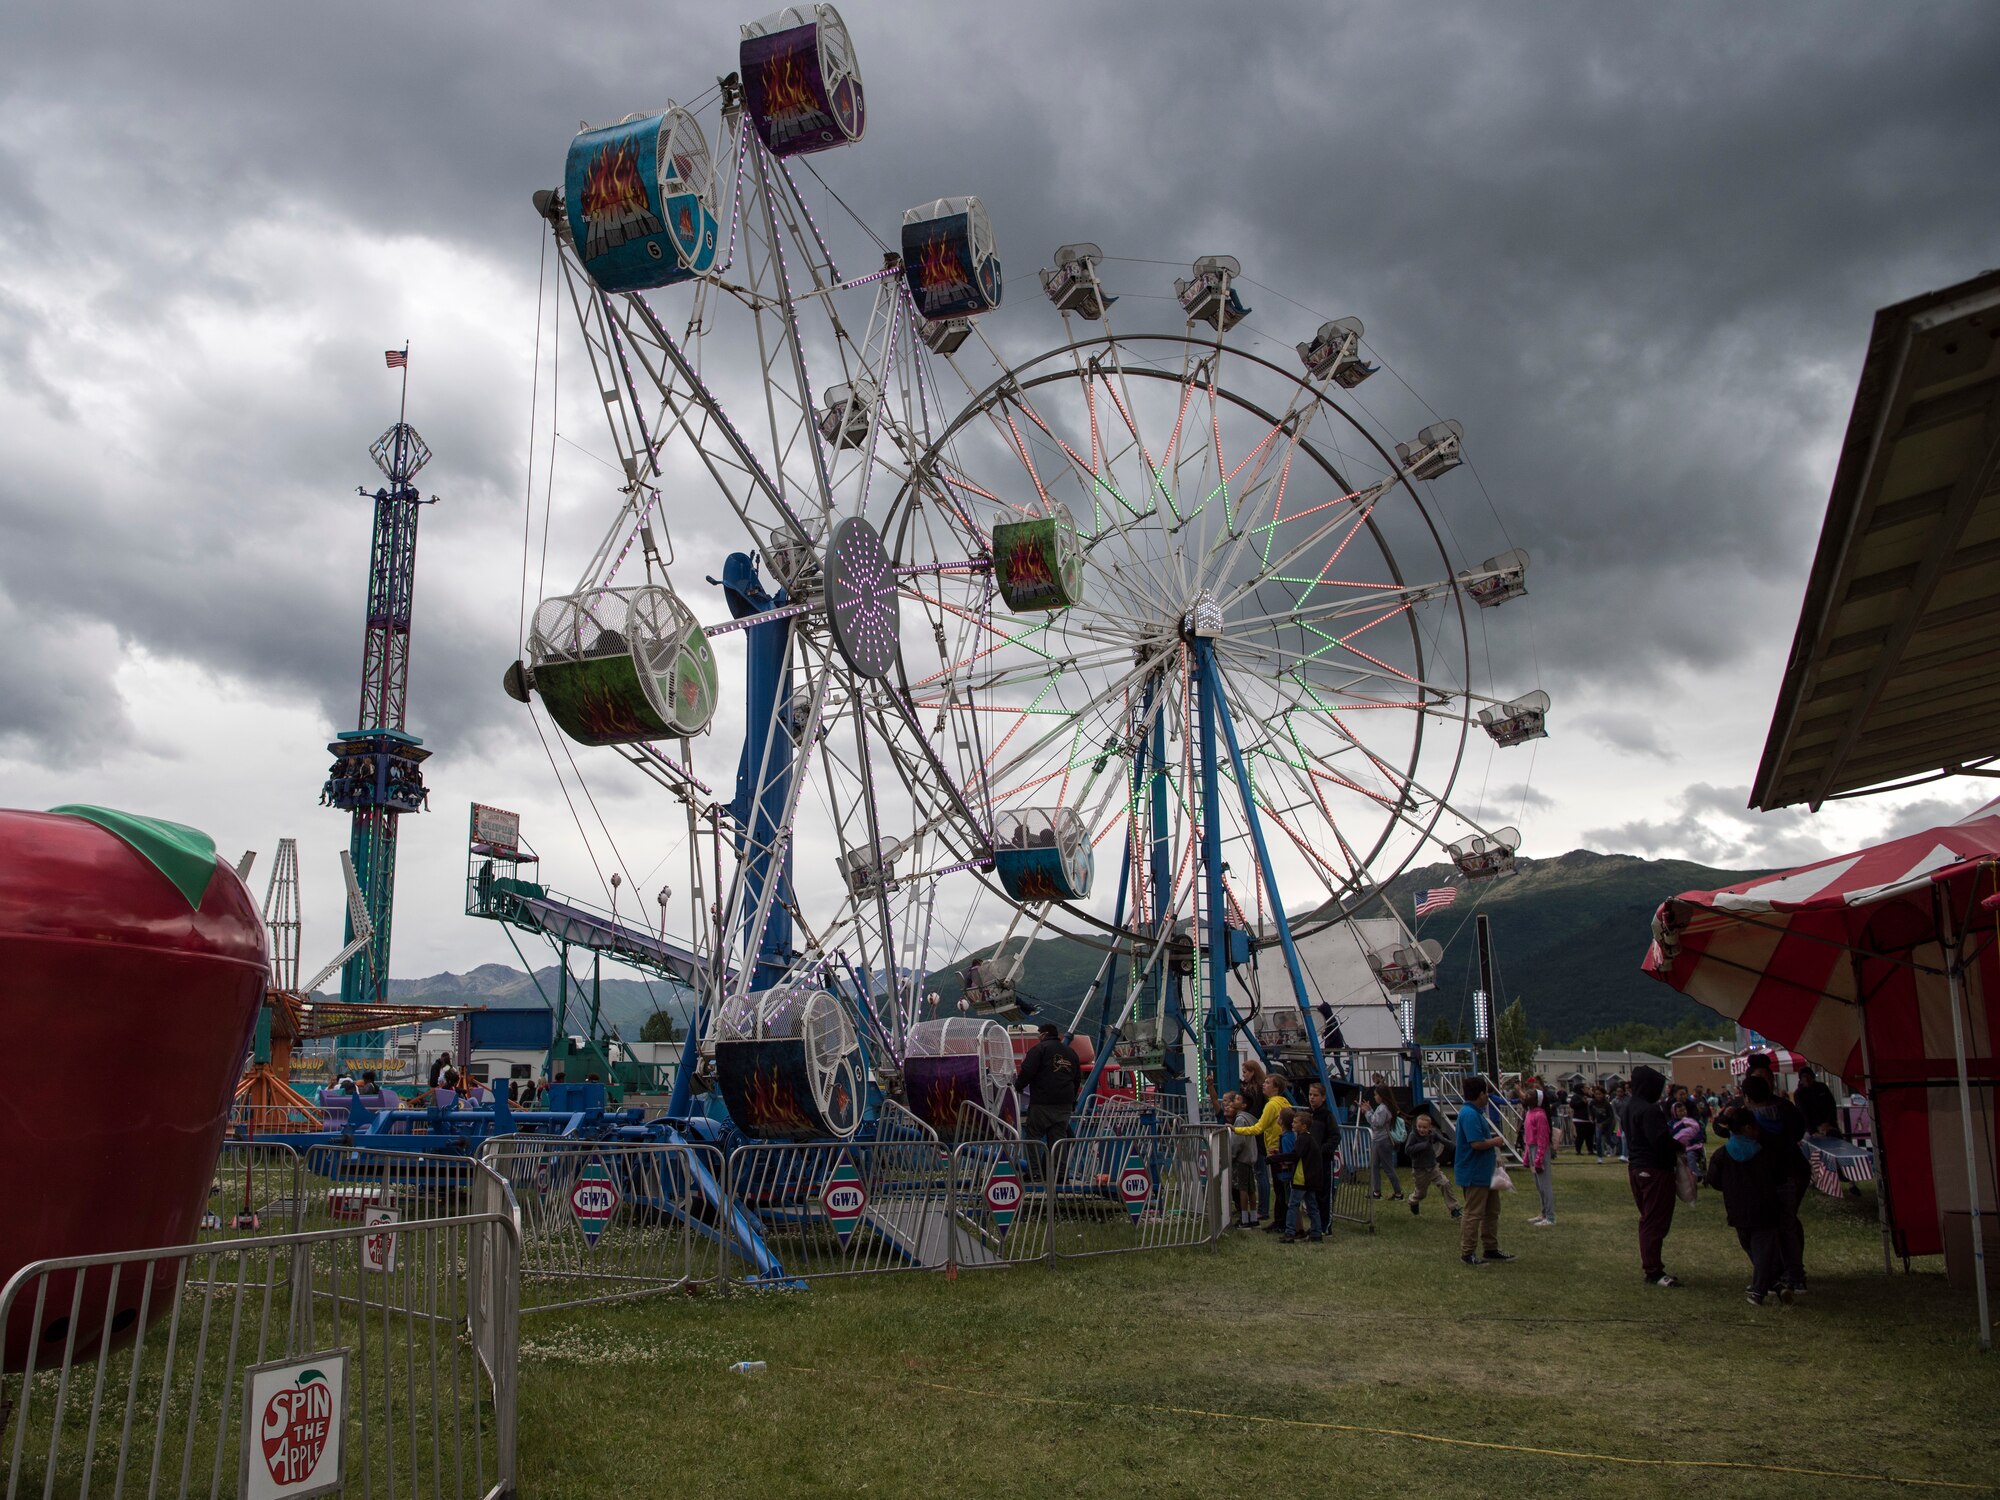 Participants wait in line for amusement rides and games offered during the 3rd annual Summer Fest hosted by the 673d Force Support Squadron at Joint Base Elmendorf-Richardson, Alaska, July 8, 2018. The event was open to anyone with base access and offered free activities such as carnival rides, a petting zoo, face painting, a bungee trampoline, and carnival games.